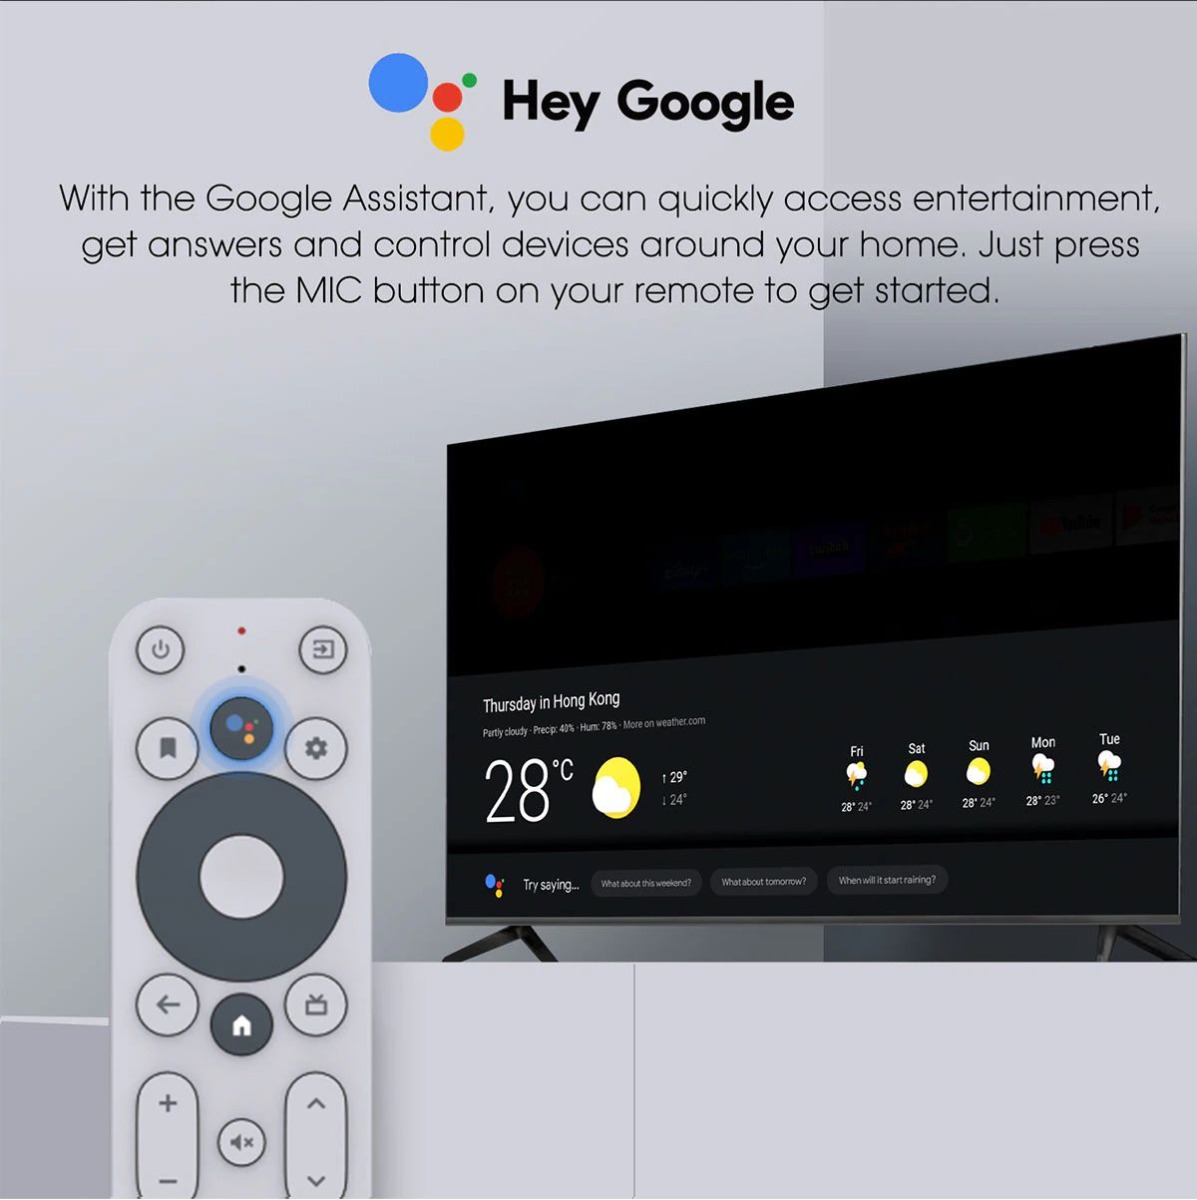 Hey Google With the Google Assistant you can quickly access entertainment get answers and control devices around your home. Just press the MIC button on your remote to get started.